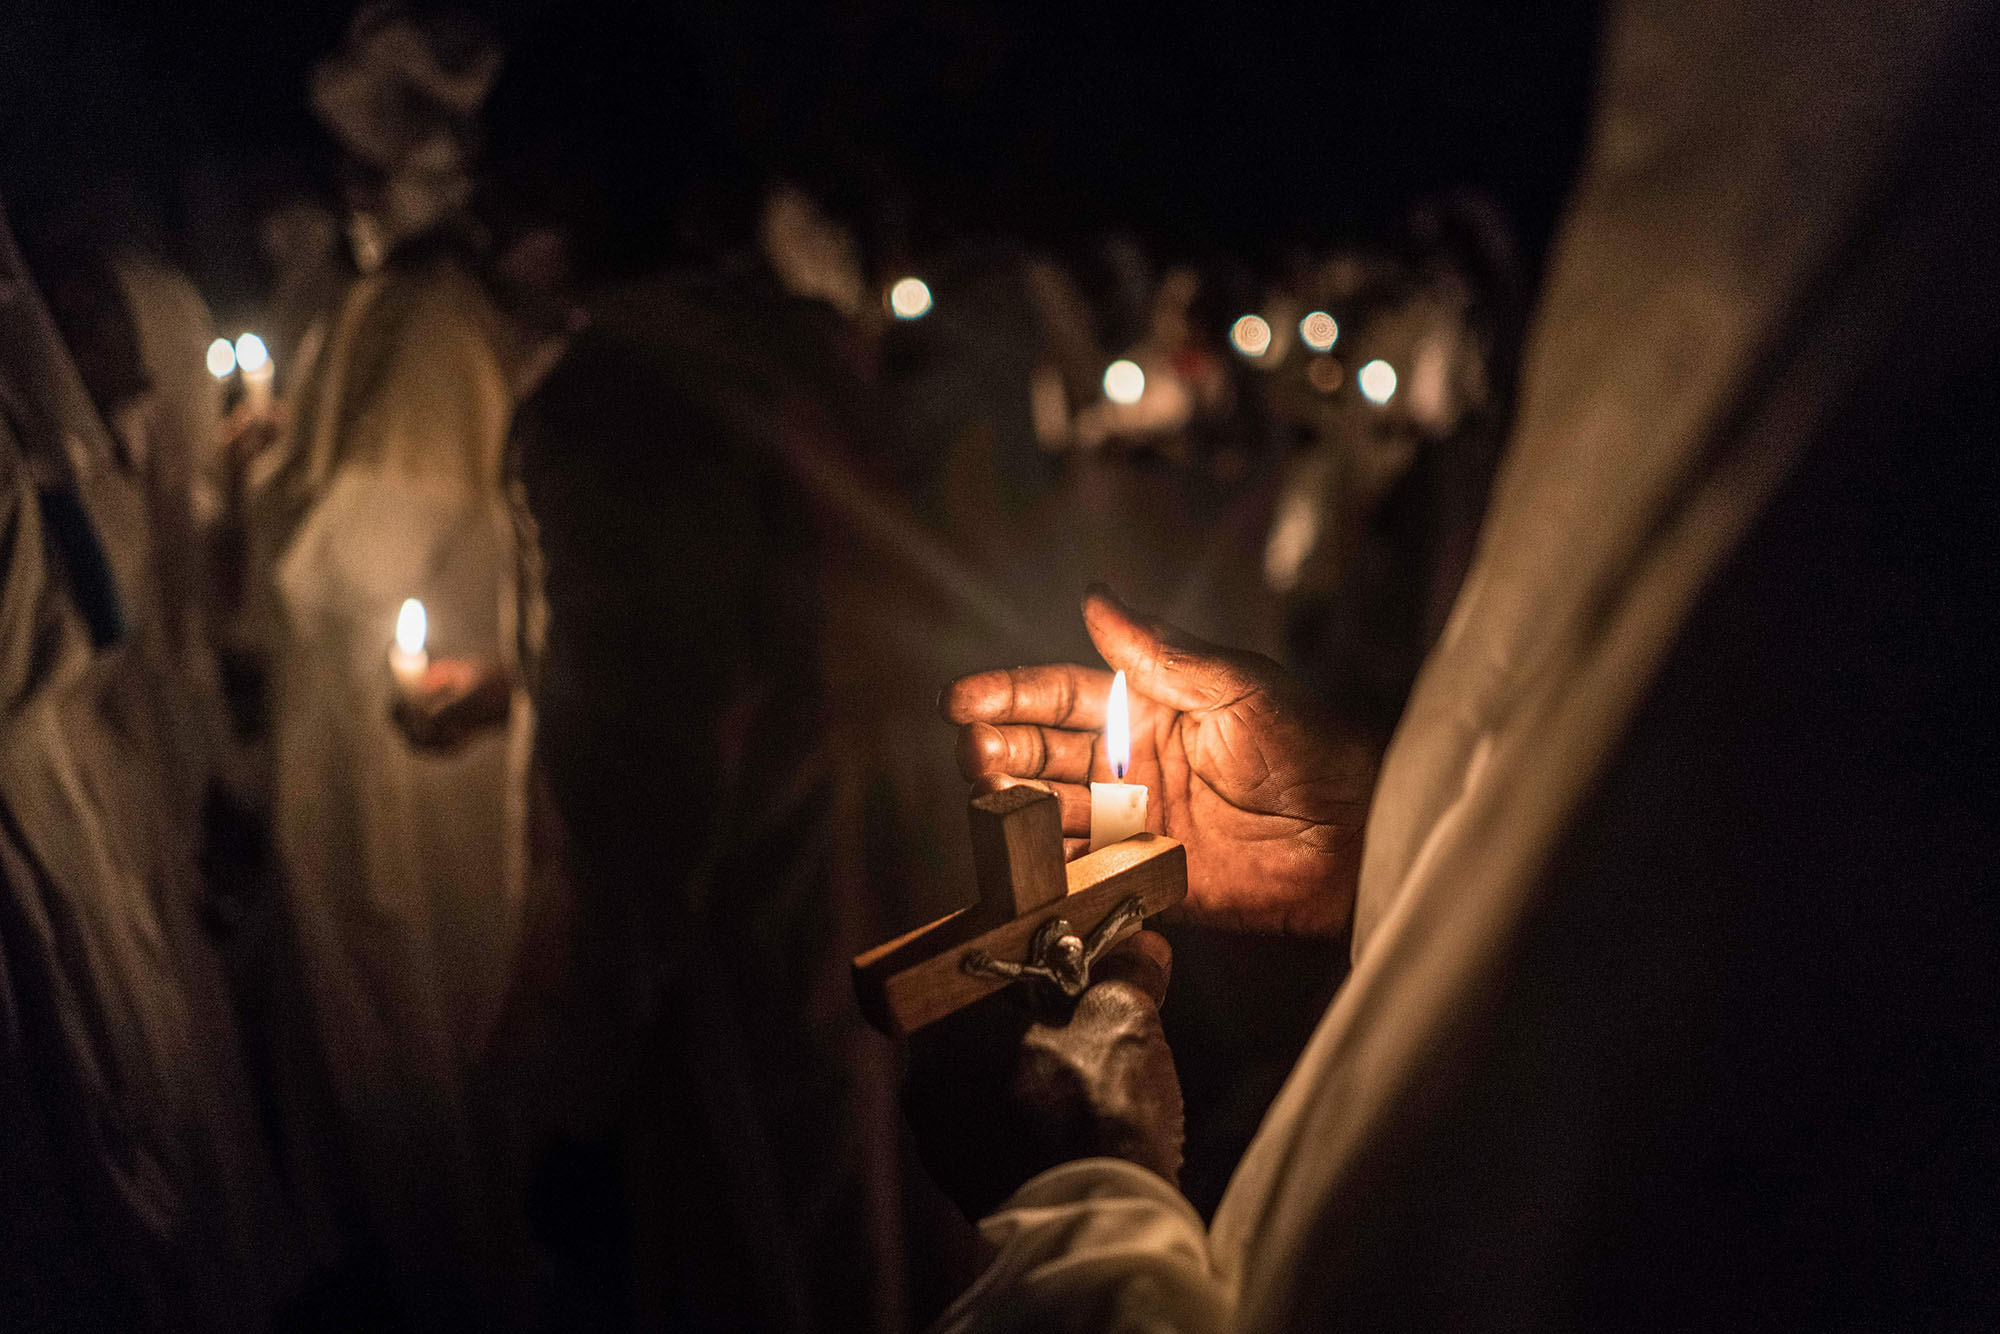 Photos of Midnight Mass and Holy Observances of Christmas - The Atlantic